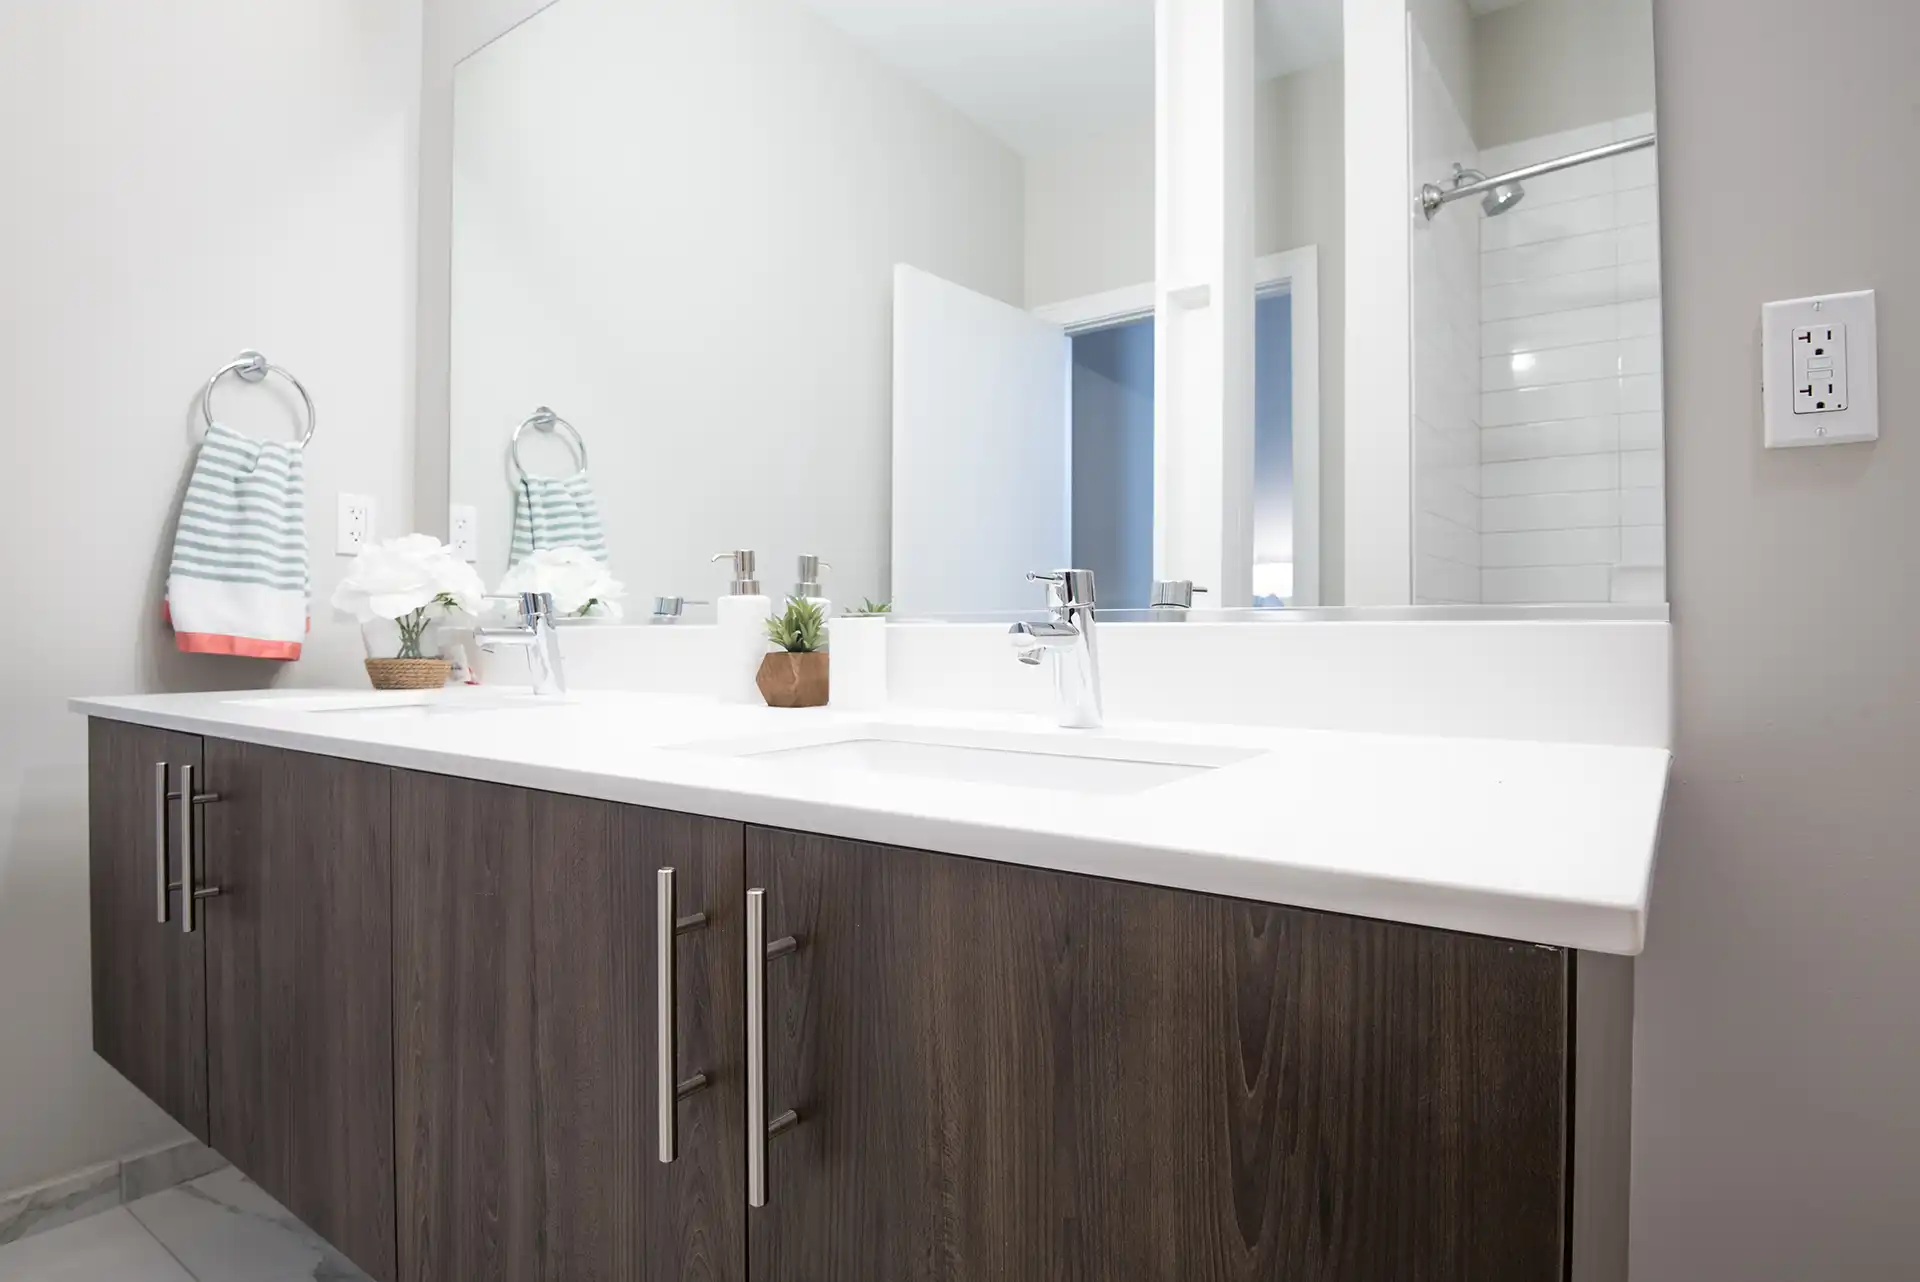 Double vanity with large mirror, custom cabinetry, and modern chrome fixtures.